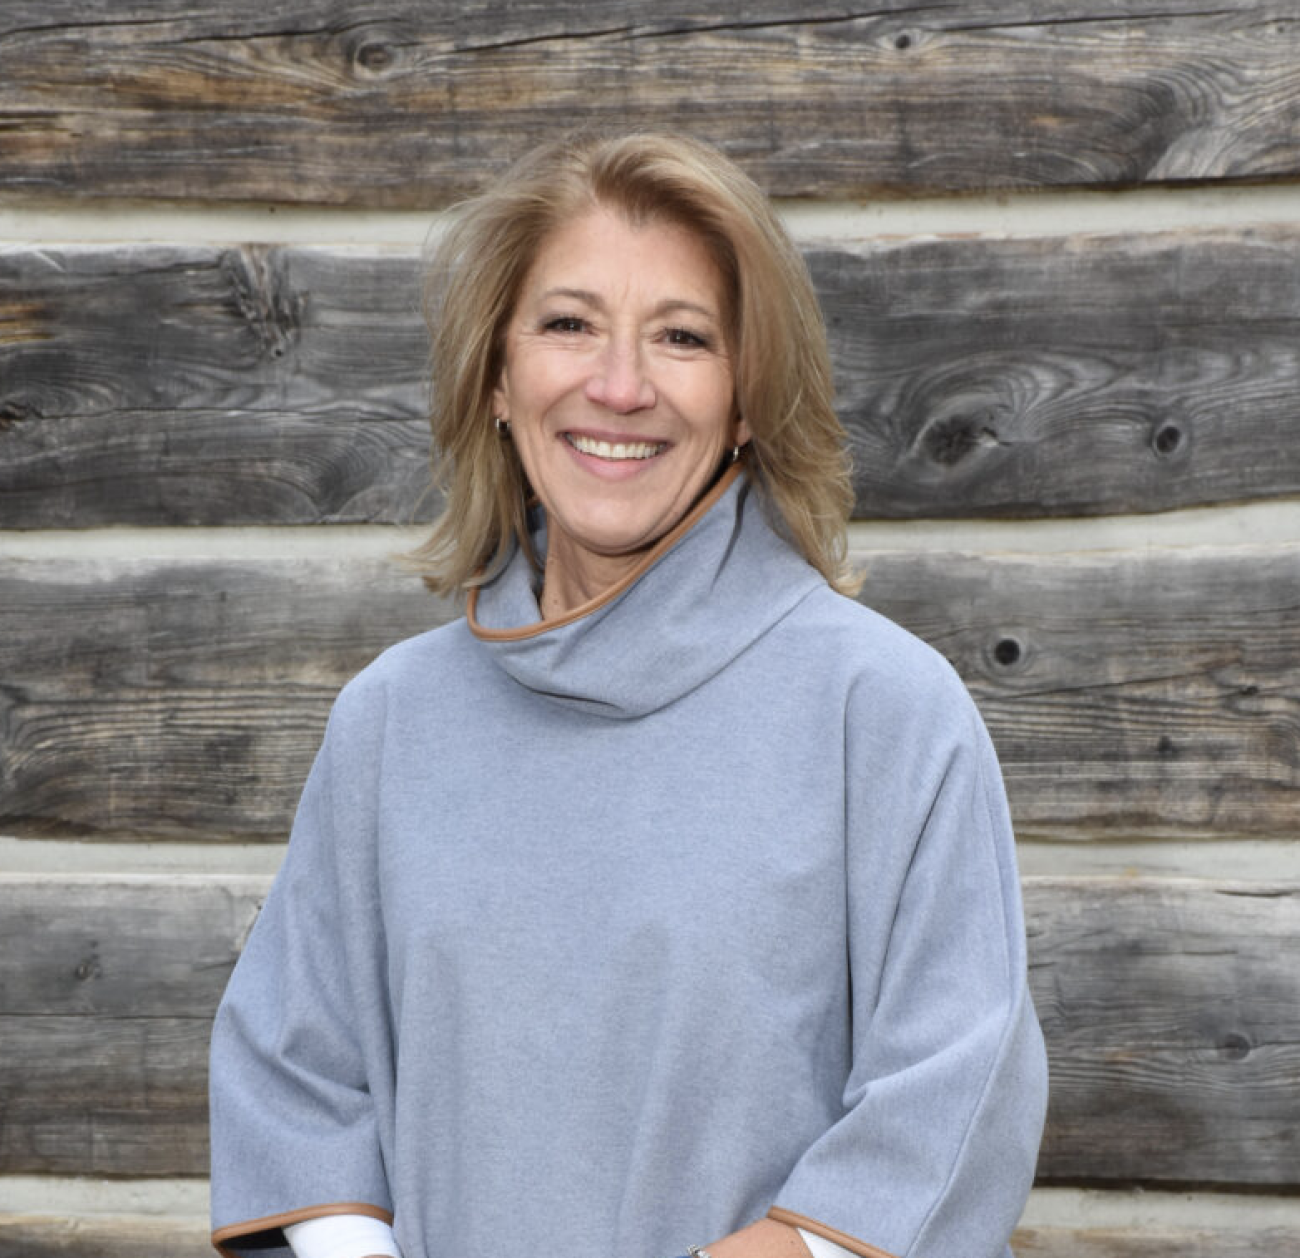 Lisa Trombley, wearing a grey turtleneck, poses for a photo